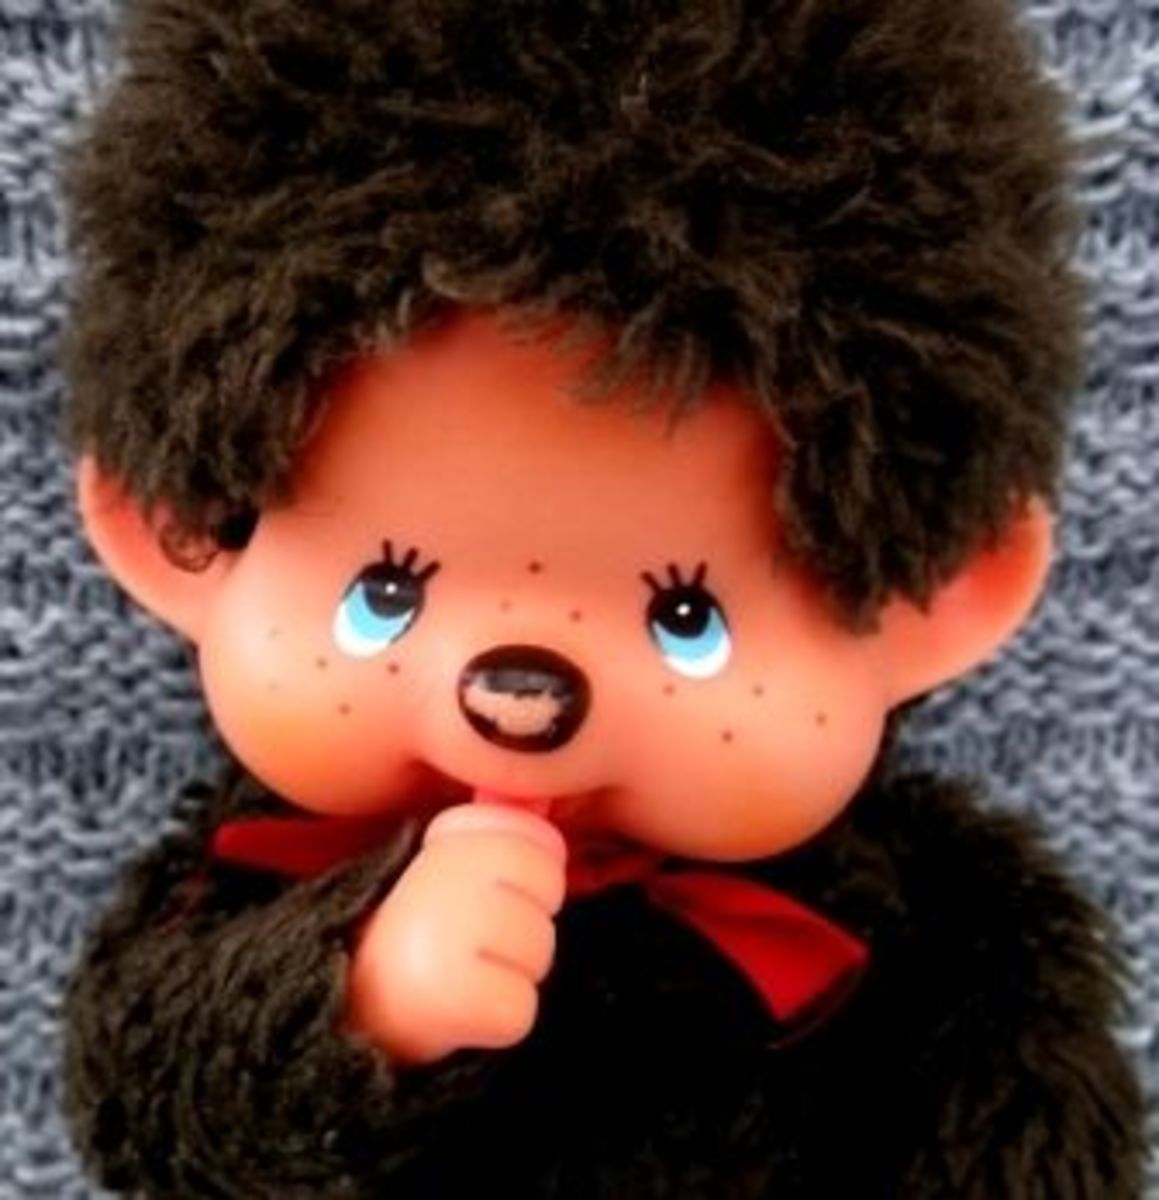 Monchhichis and you—have you ever been friends? This is one of my oldest Monchhichi monkeys.